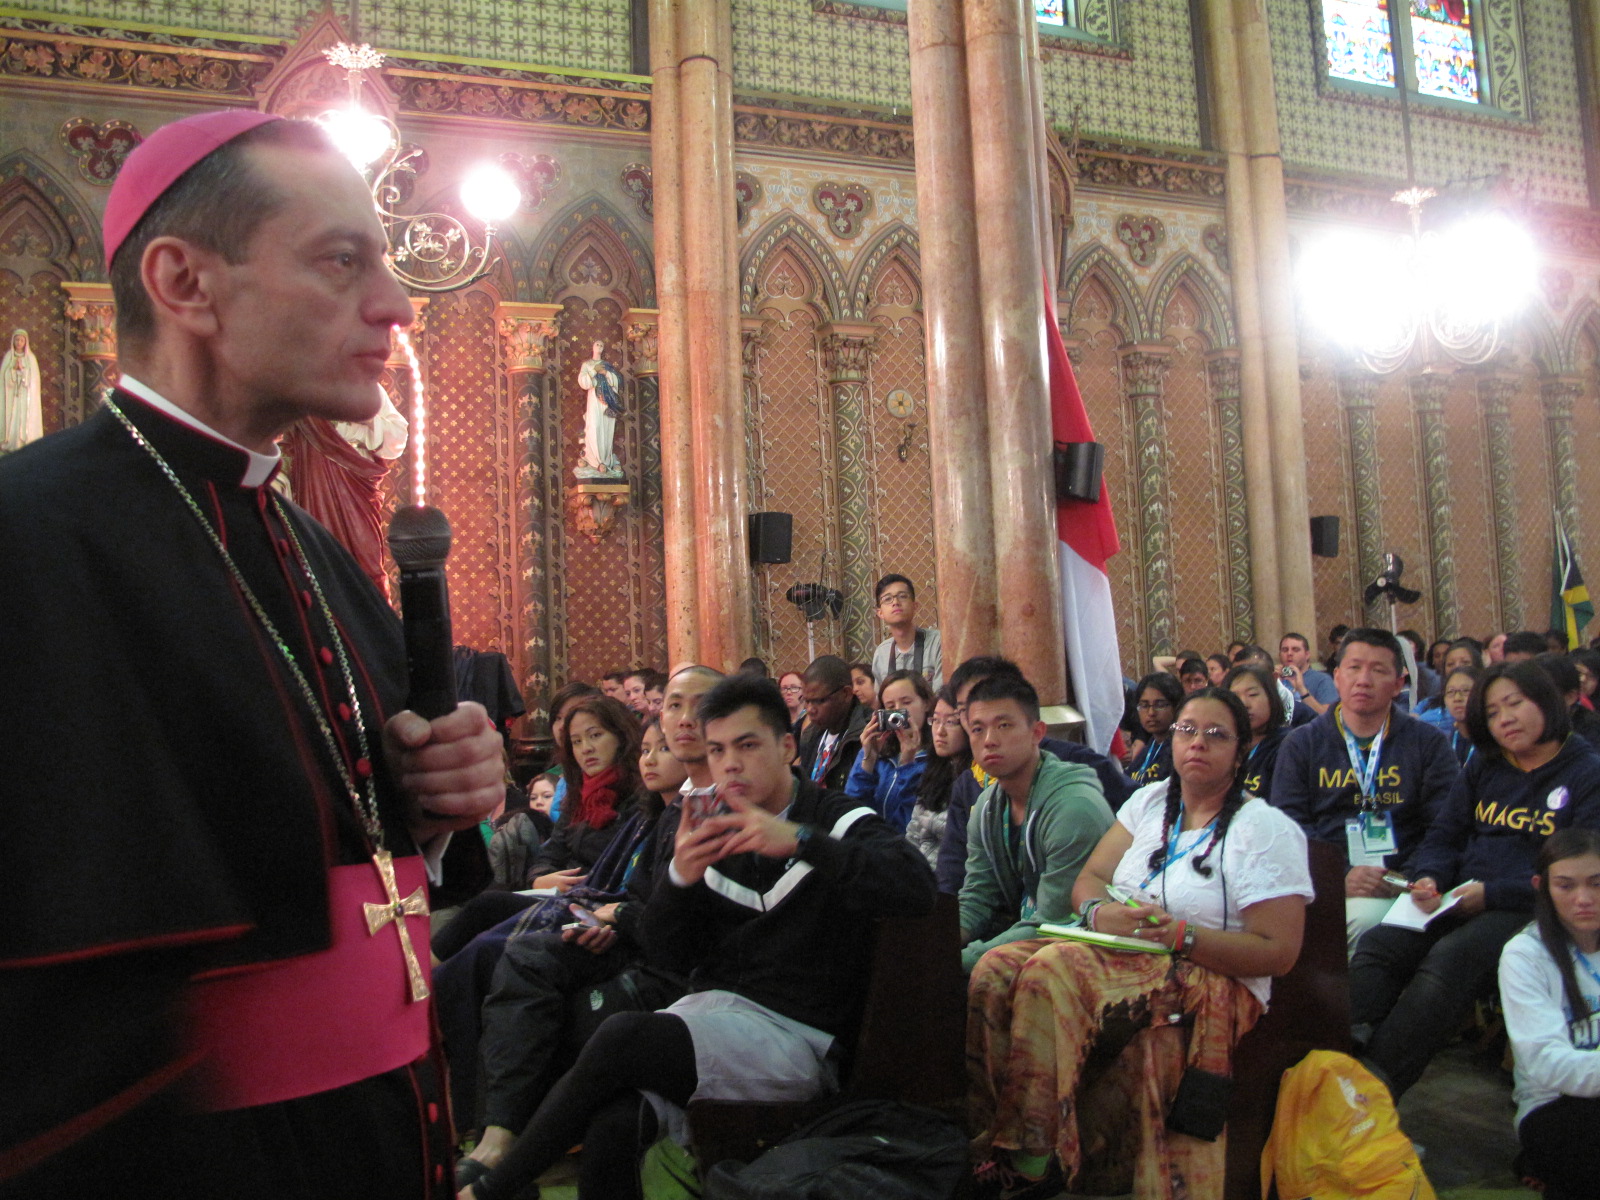 Below, Auxiliary Bishop Frank Caggiano shares his wisdom with English-speaking pilgrims during a catechesis session in Rio de Janeiro. After his prepared speech, he took questions from the audience. Although he joked that he would answer only easy questions, he spoke bluntly on homosexuality, abortion, and the reason behind calling the pope “holy.”